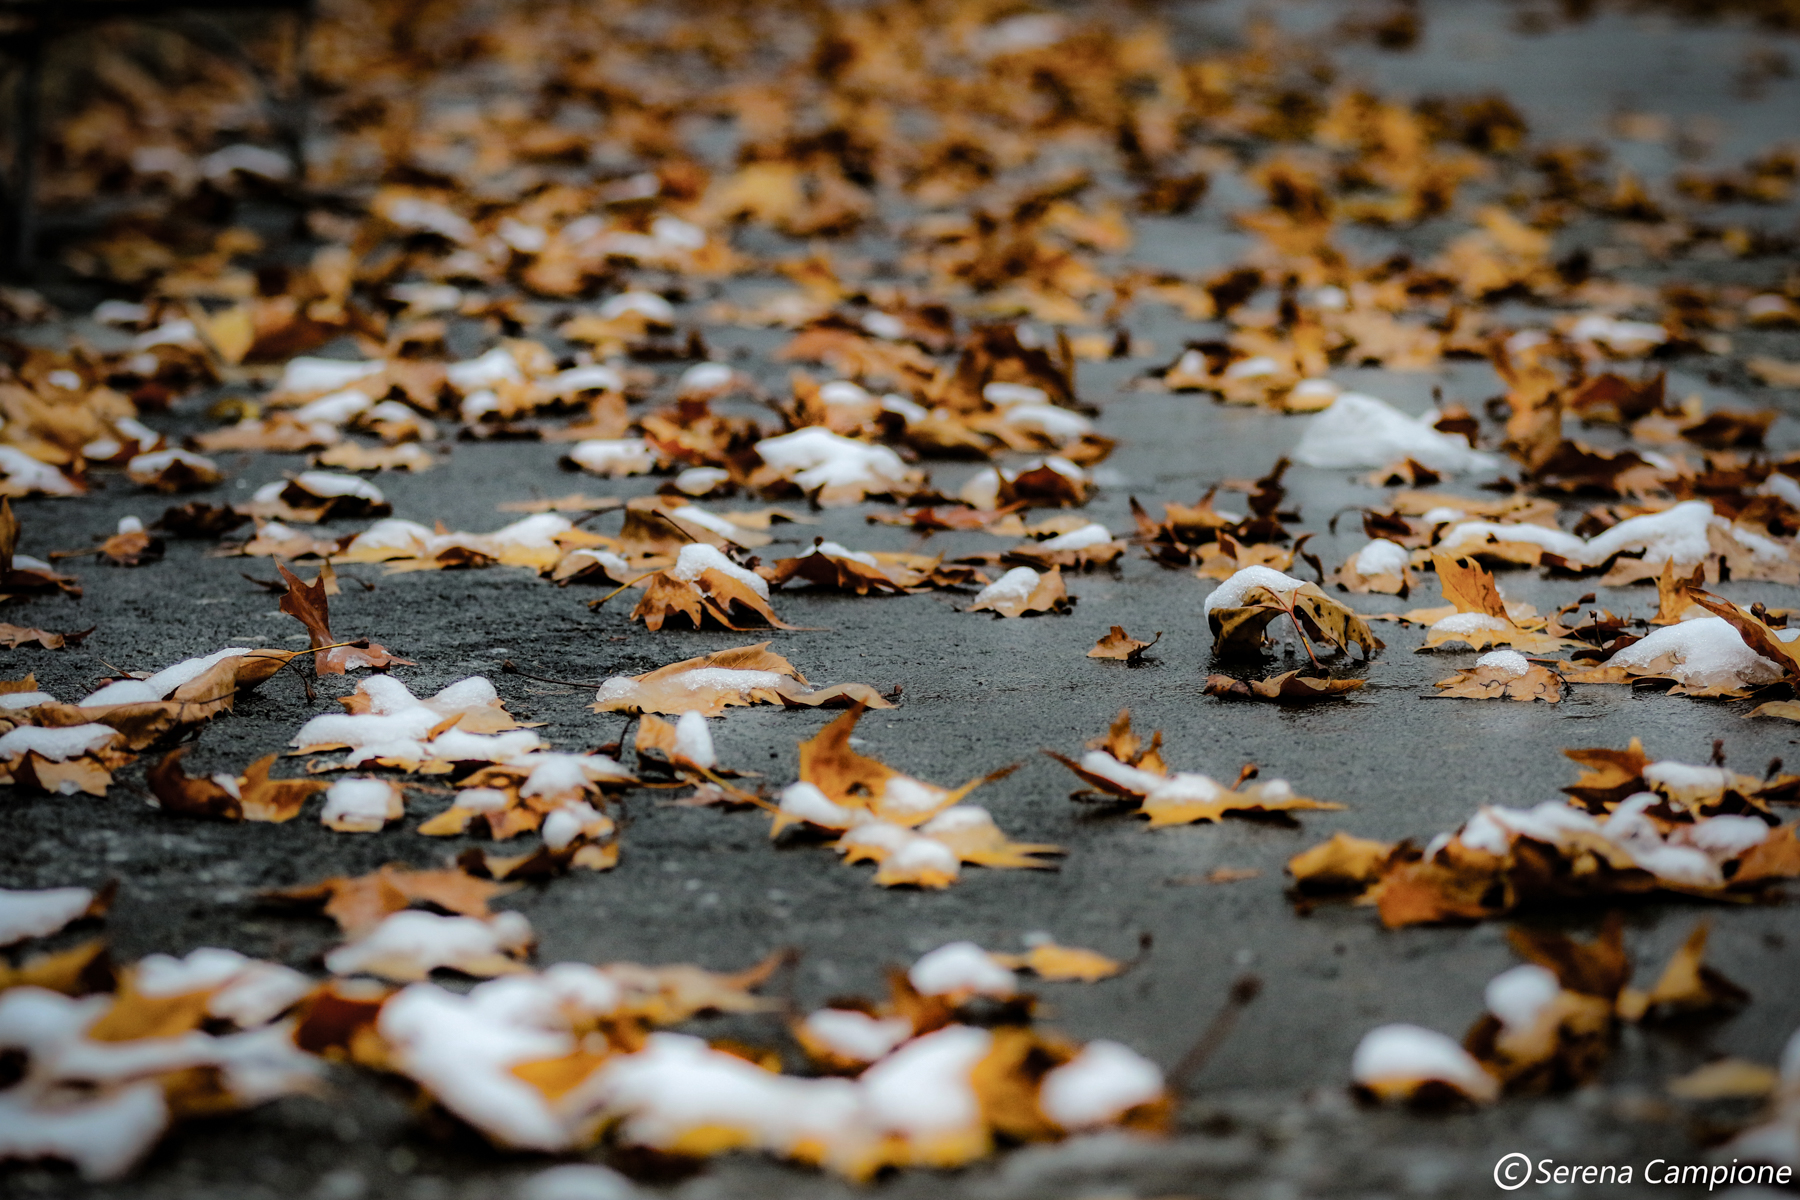 Snow and leaves. Between autumn and winter....